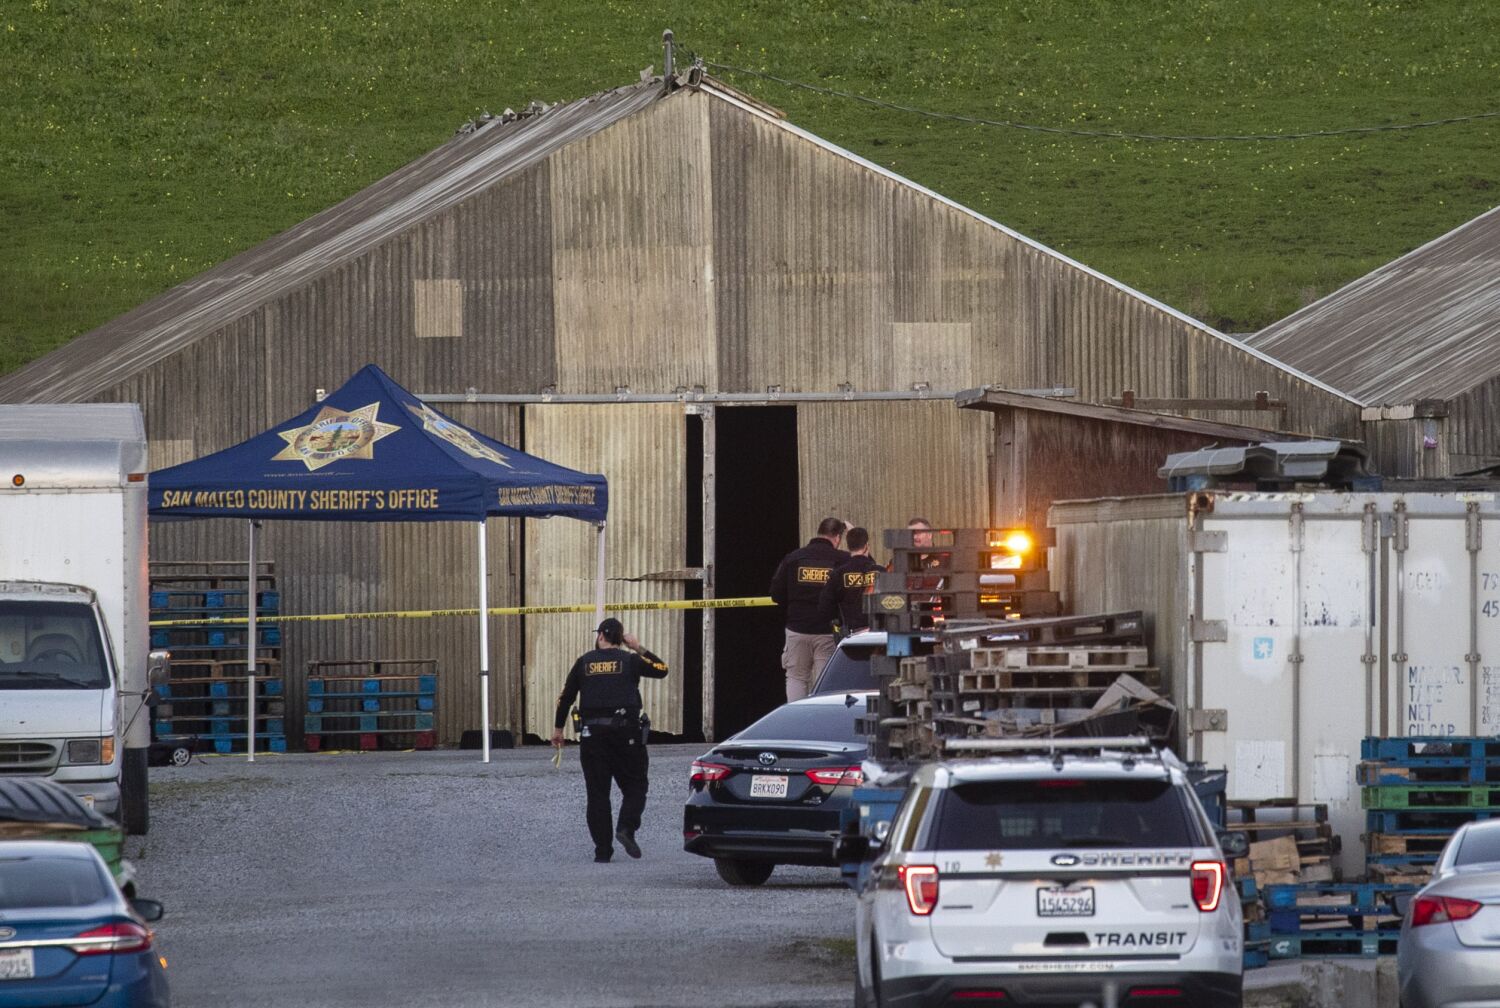 Gunfire as children watched: What we know about the Half Moon Bay shooting